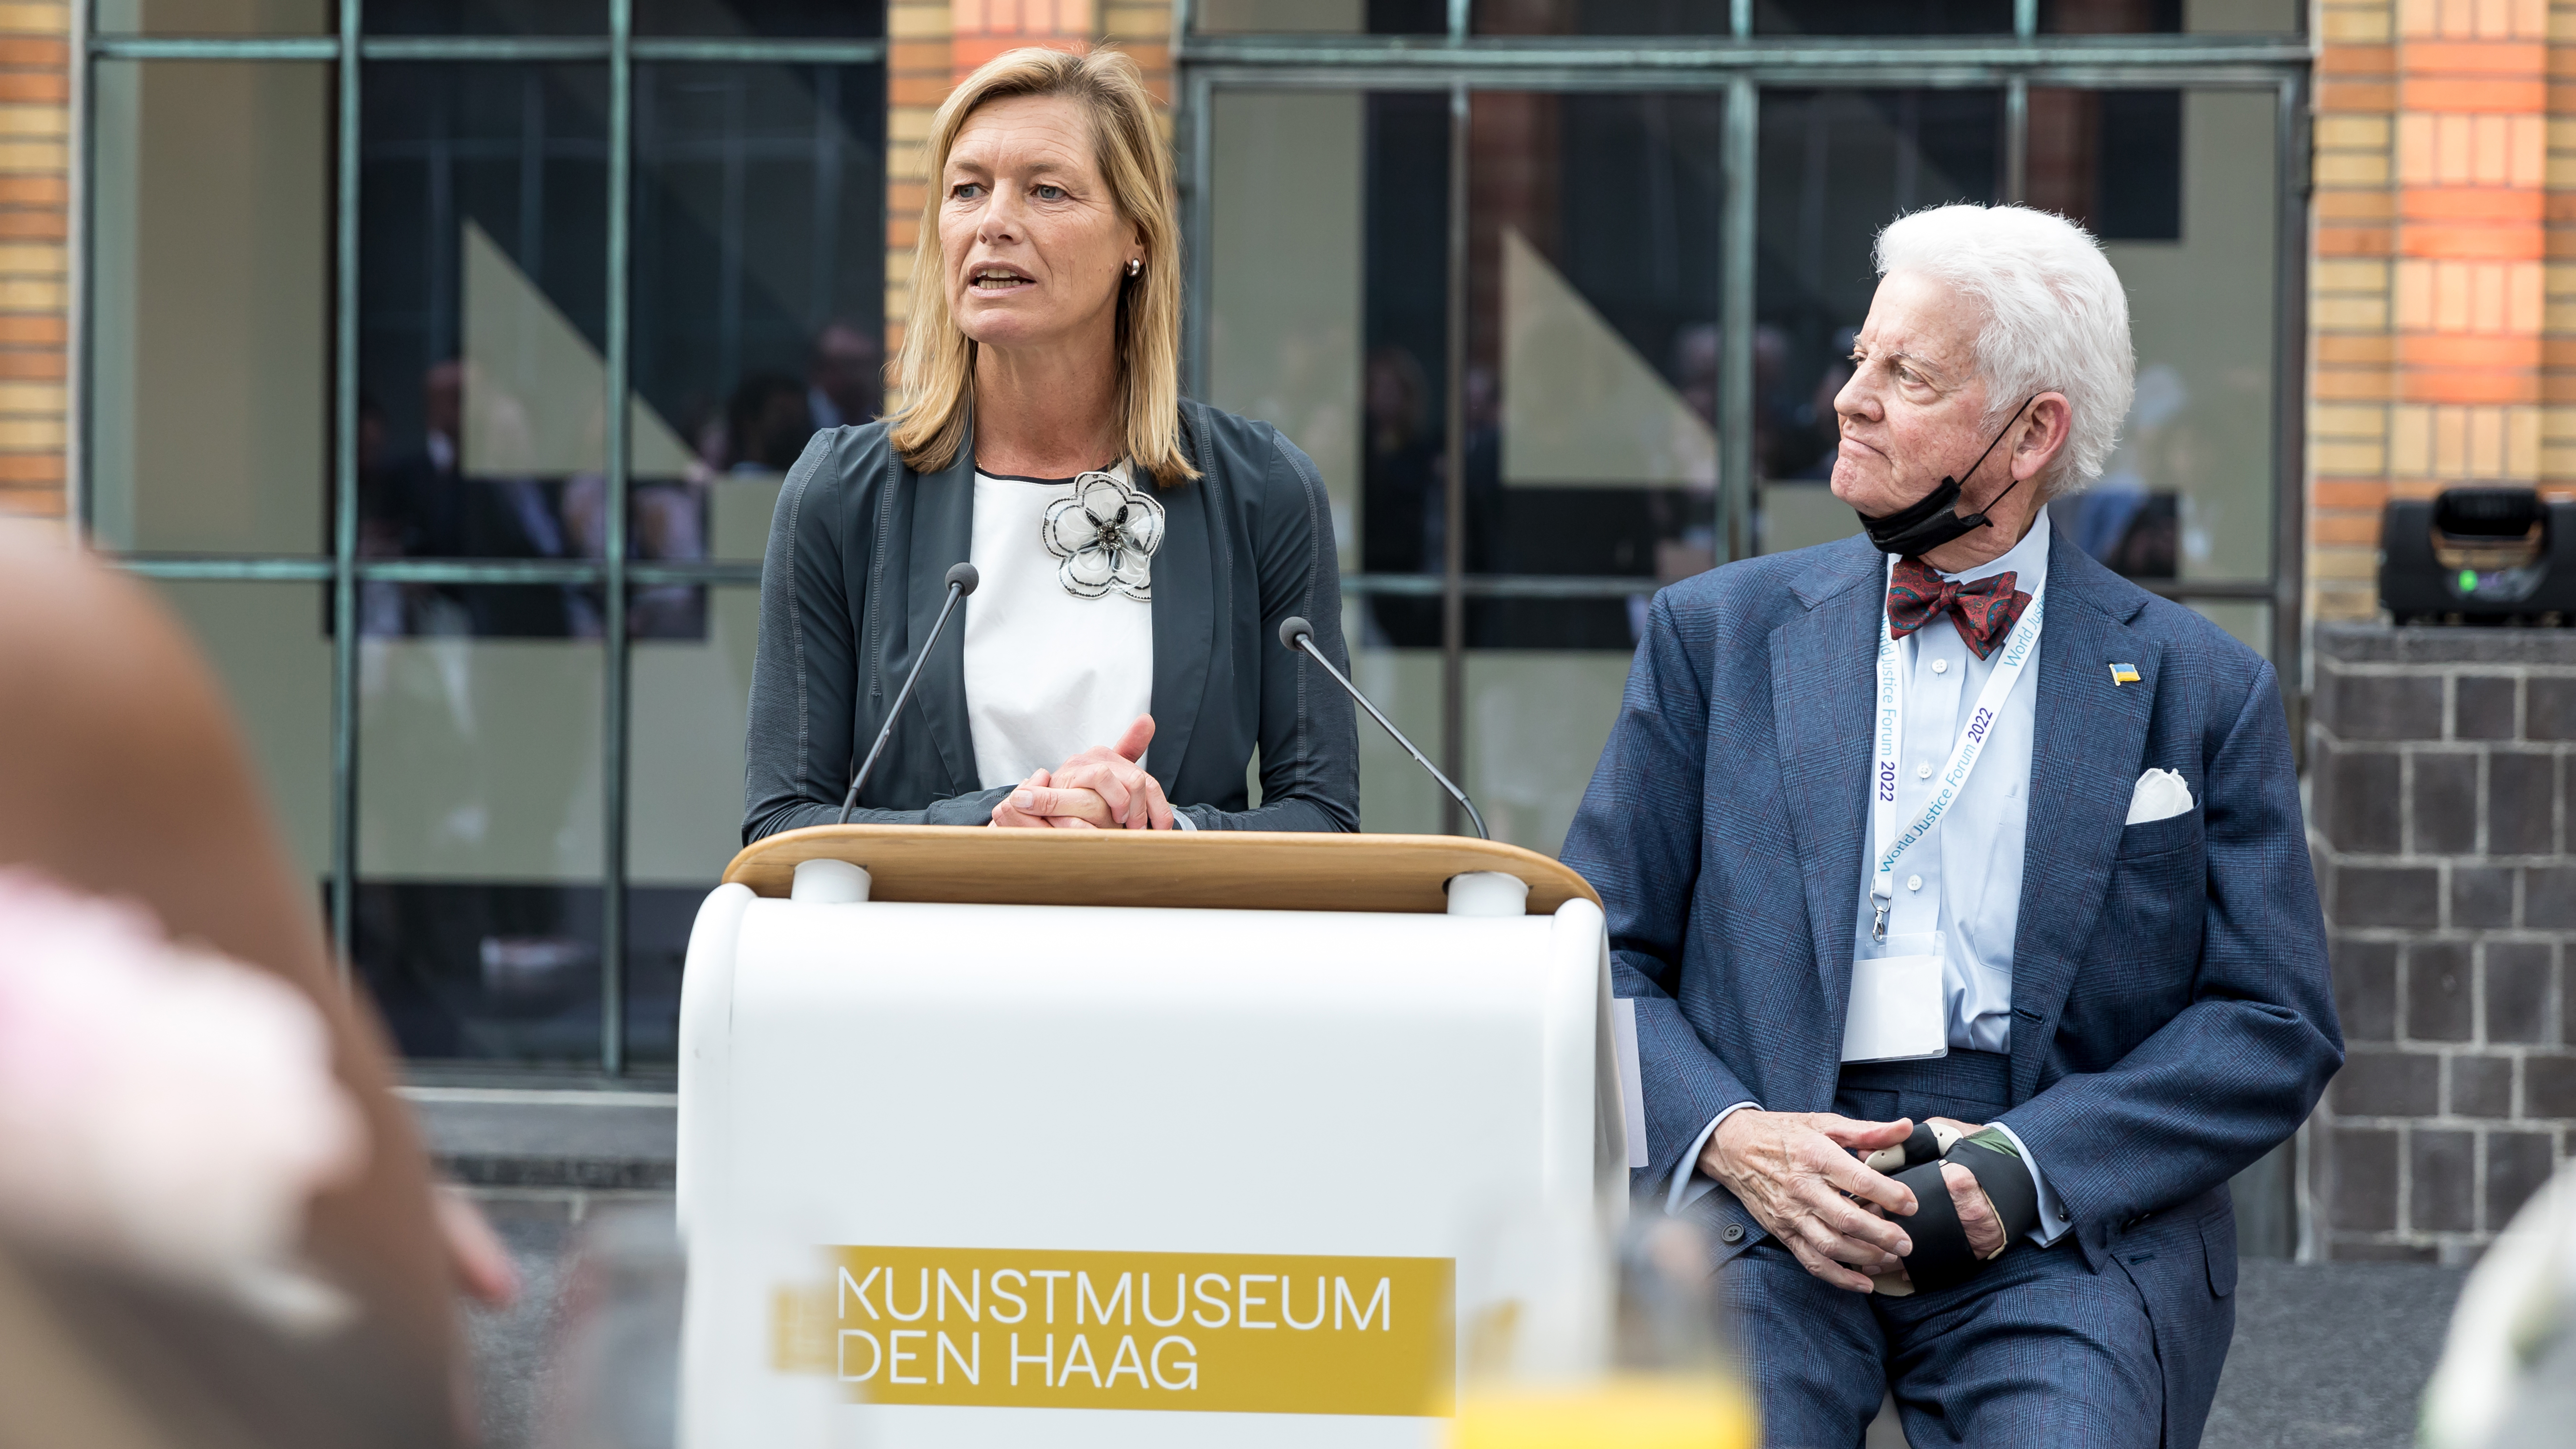 Marriët Schuurman, Director of Stability and Humanitarian Aid at the Dutch Ministry of Foreign Affairs, speaking at the welcome reception with World Justice Project Co-Founder and CEO Bill Neukom.